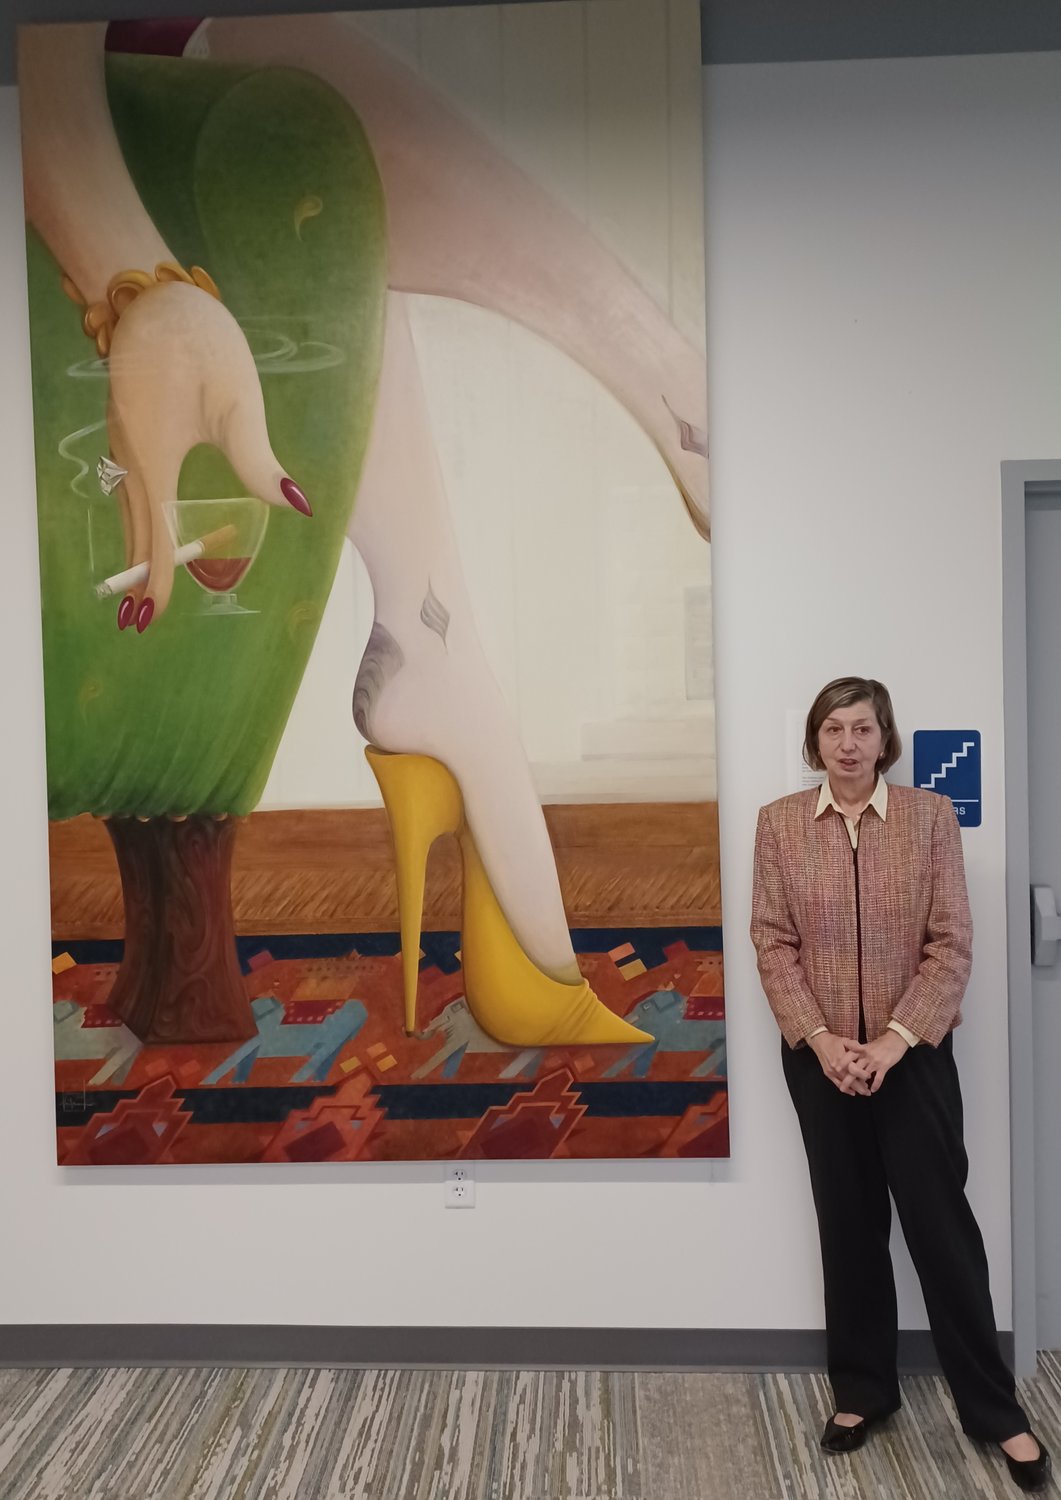 “Seventeen Legs,” currently on exhibit at the link, is one of Susanne Schuenke’s largest paintings. It measures 9 by more than 5 feet.